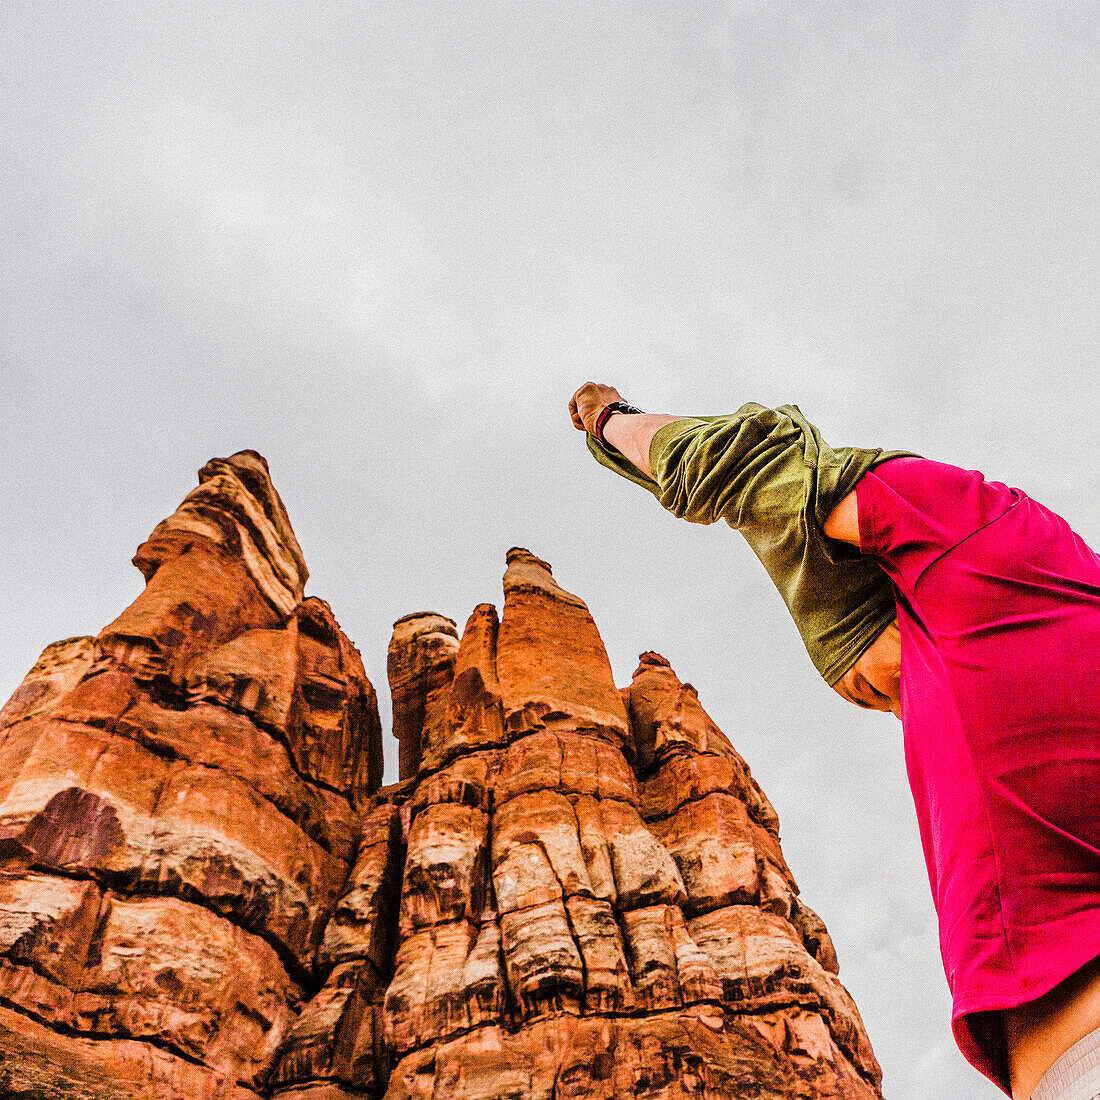 Low angle view of woman with her hands overhead, taking off her shirt among unusual sandstone formations in the Canyonlands National Park.